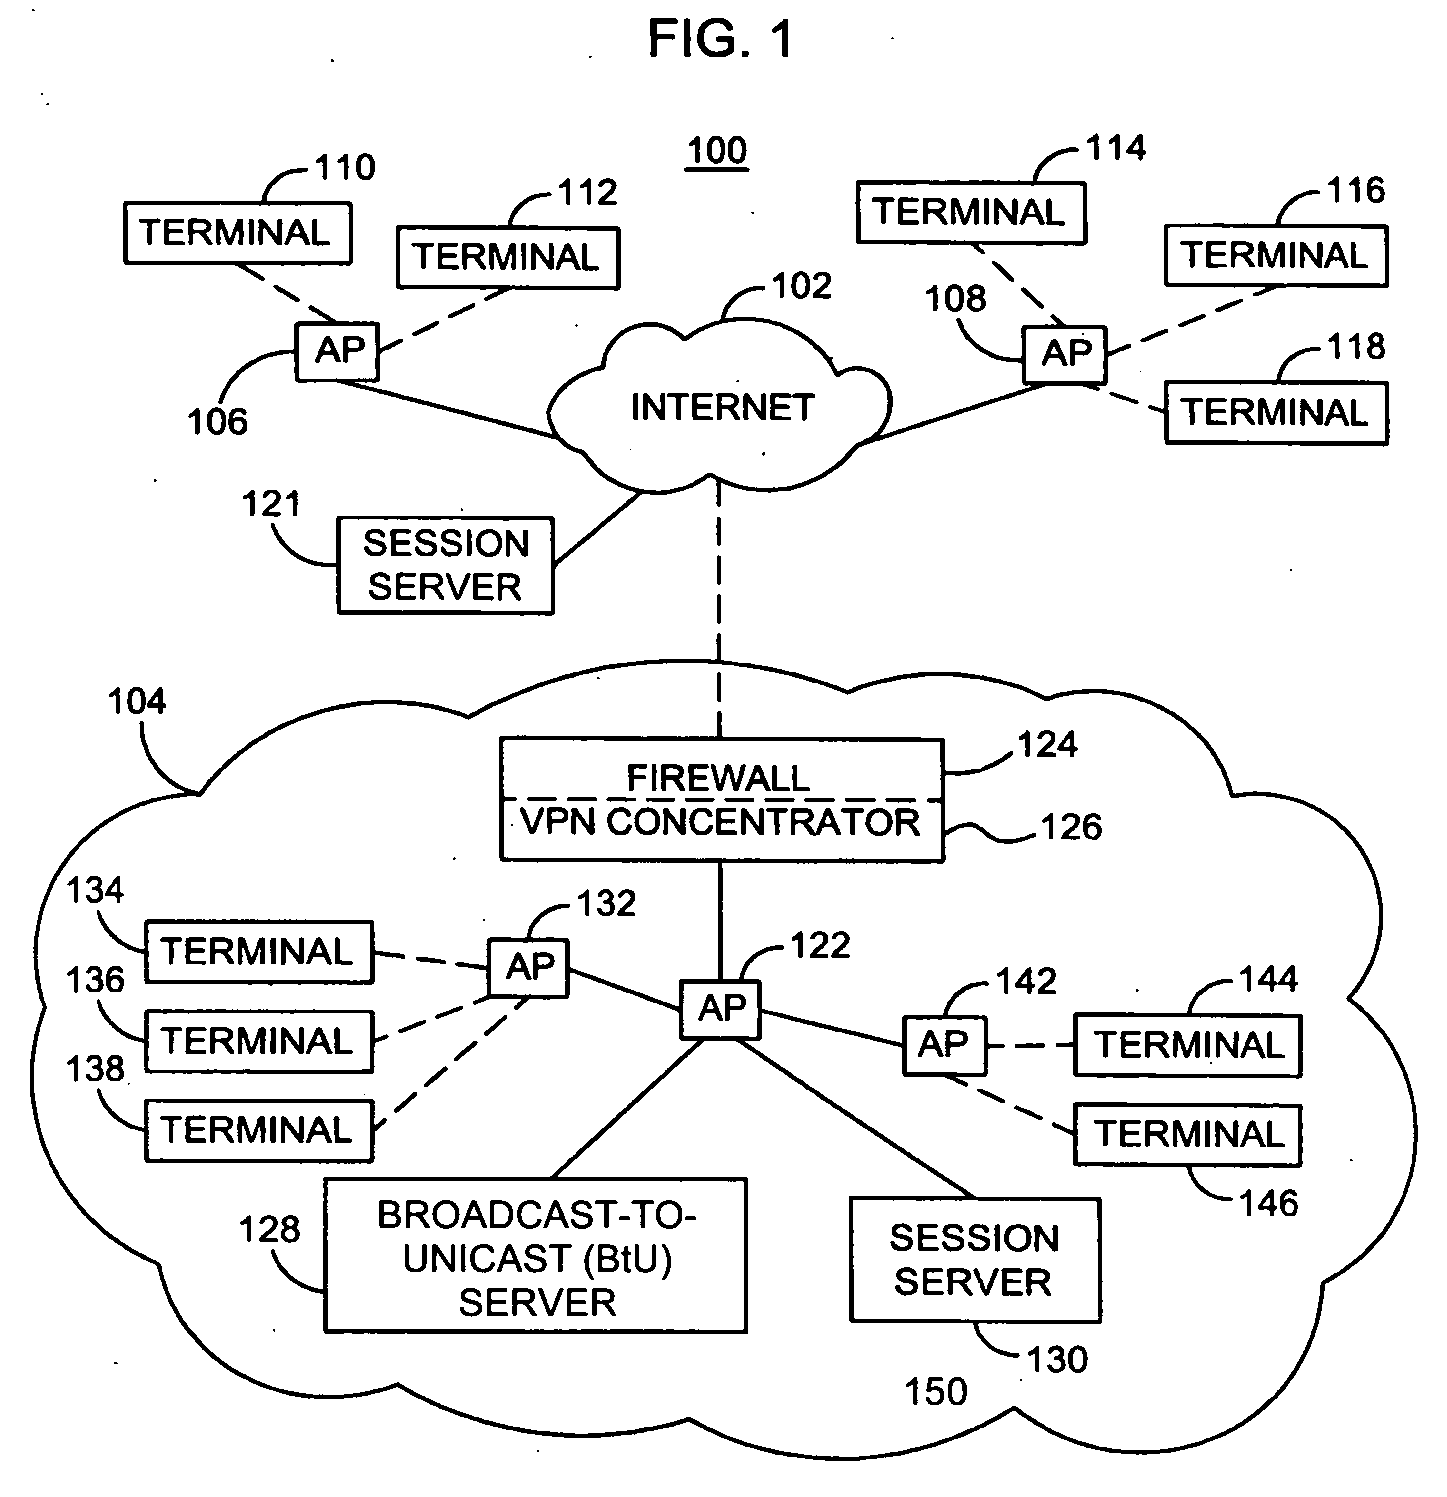 Methods and apparatus for reducing power consumption for mobile devices using broadcast-to-unicast message conversion